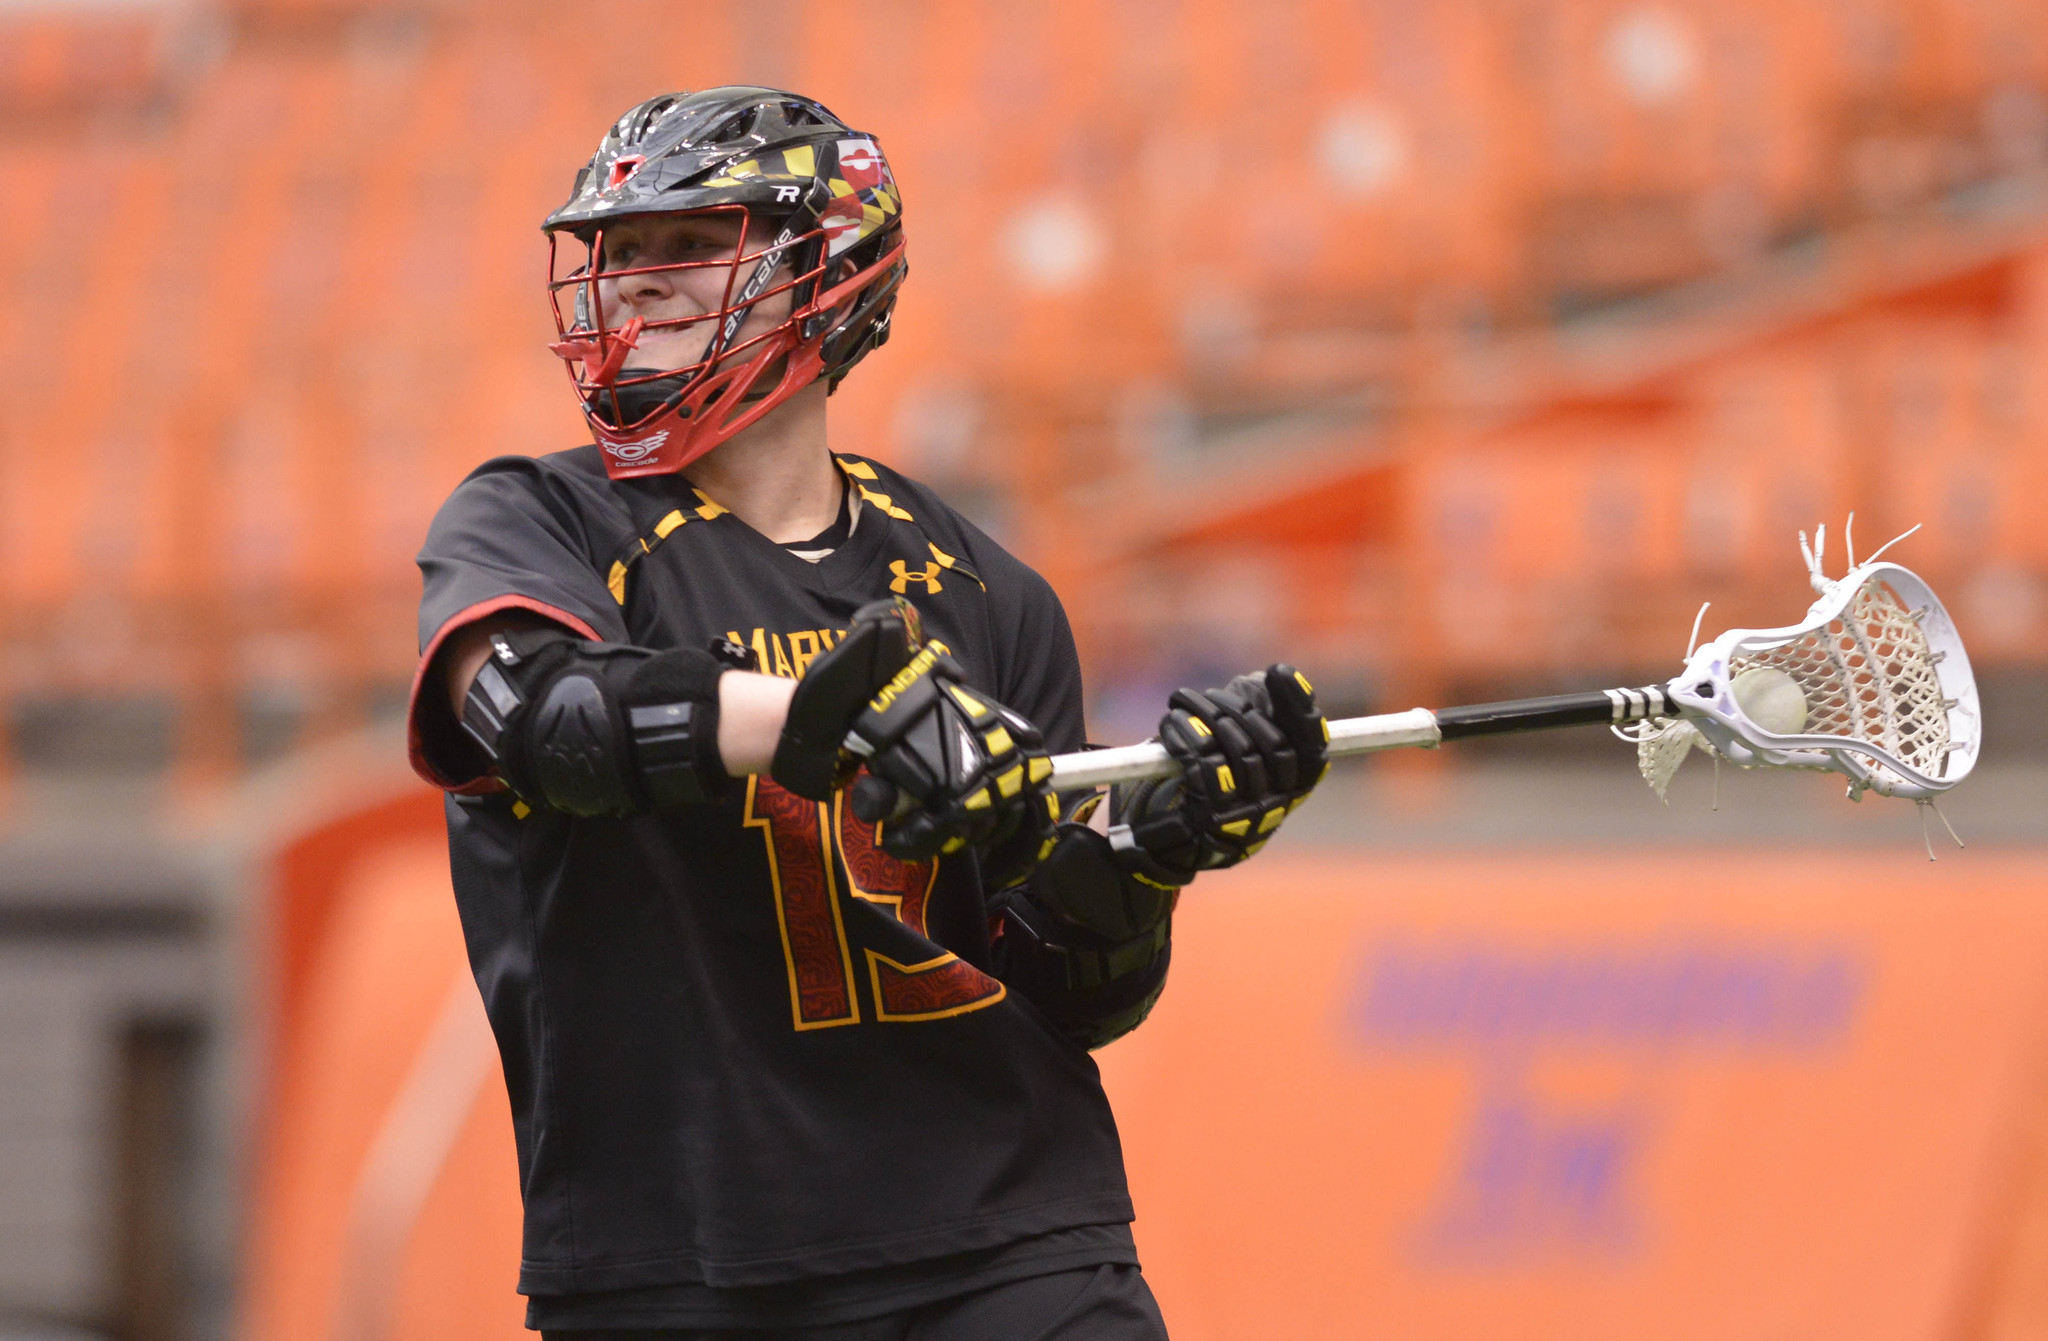 Maryland lacrosse player suspended, student assistant coach dismissed after assault charges